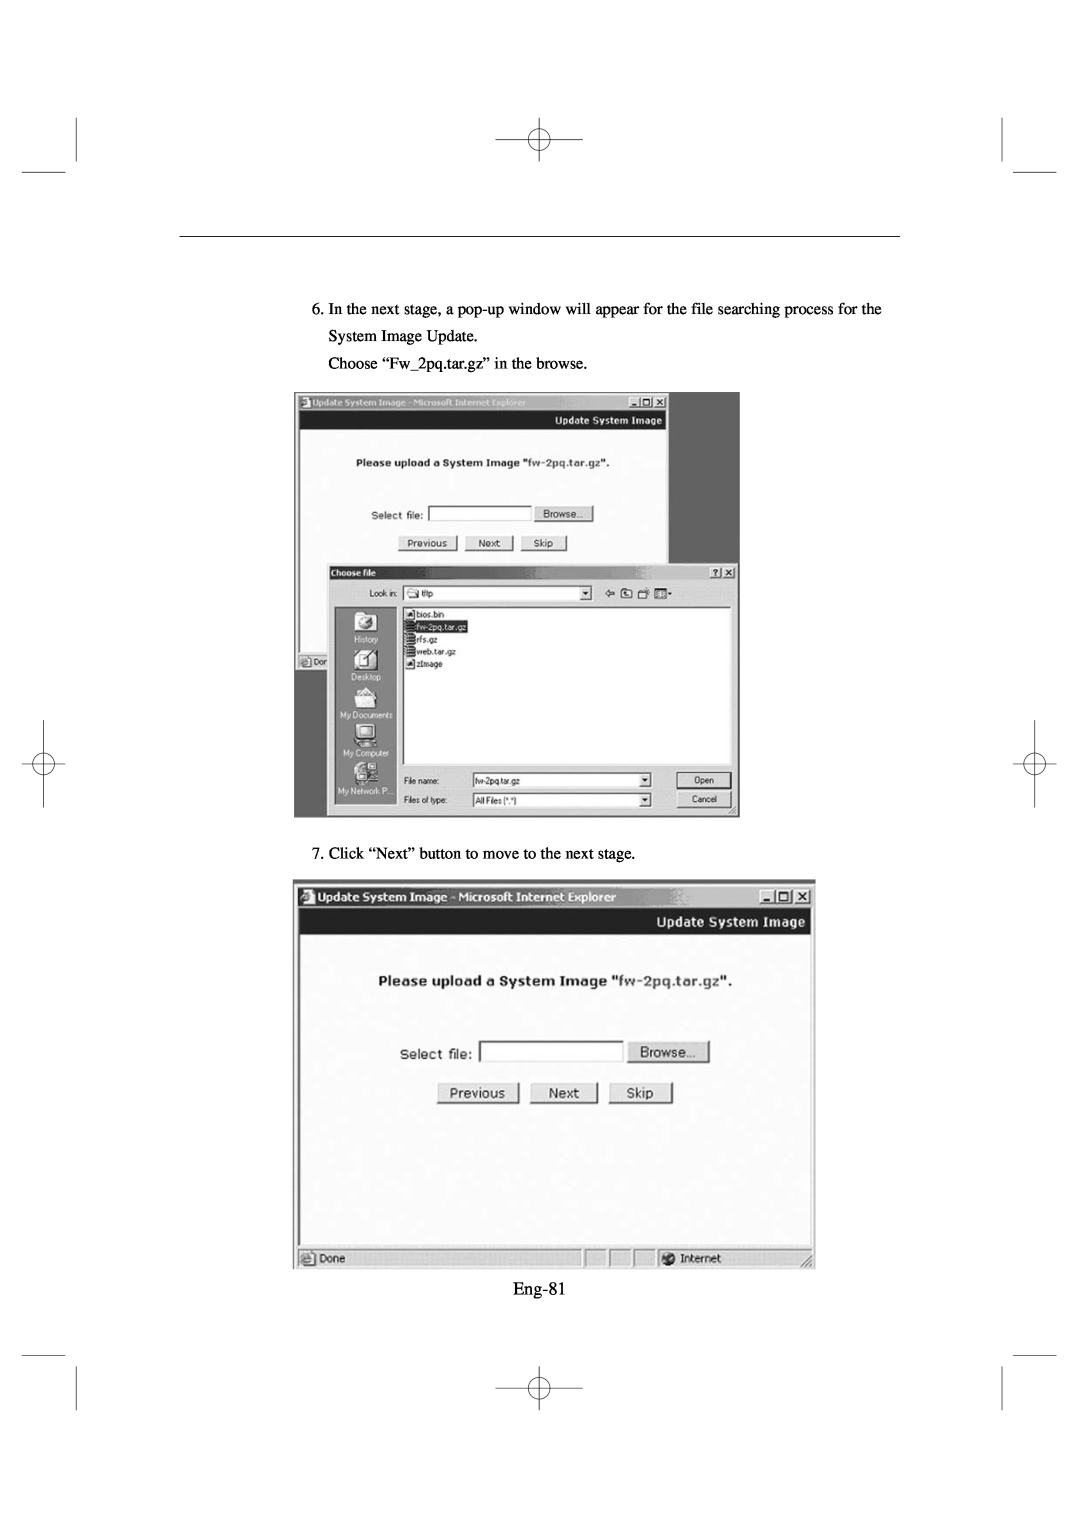 Samsung SSC17WEB manual Eng-81, Choose “Fw 2pq.tar.gz” in the browse, Click “Next” button to move to the next stage 